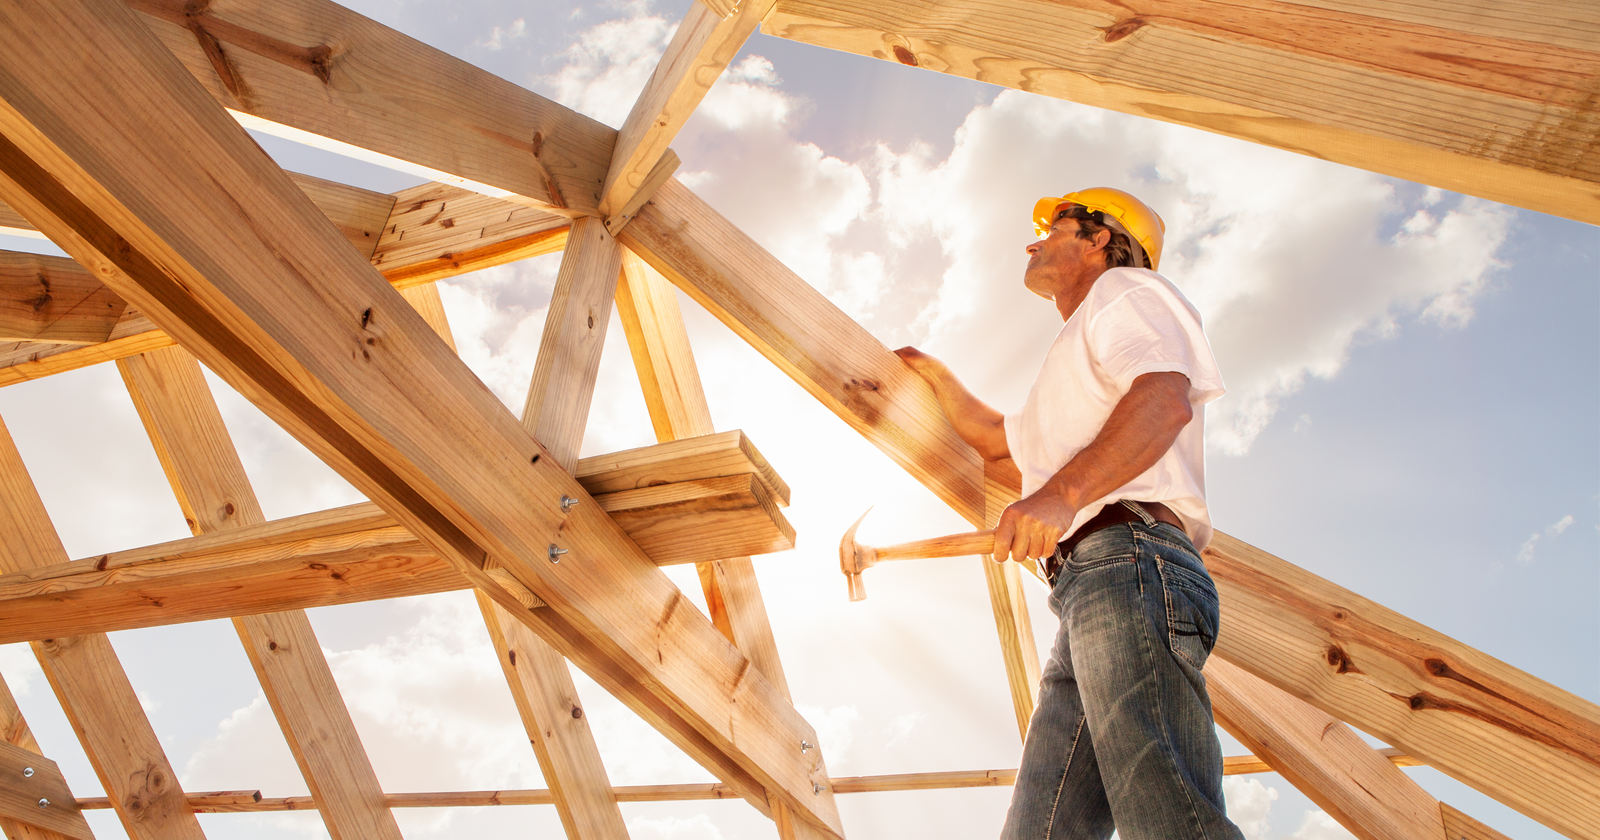 SEO For Homebuilders: How Construction Companies Rank In Search via @sejournal, @drumming